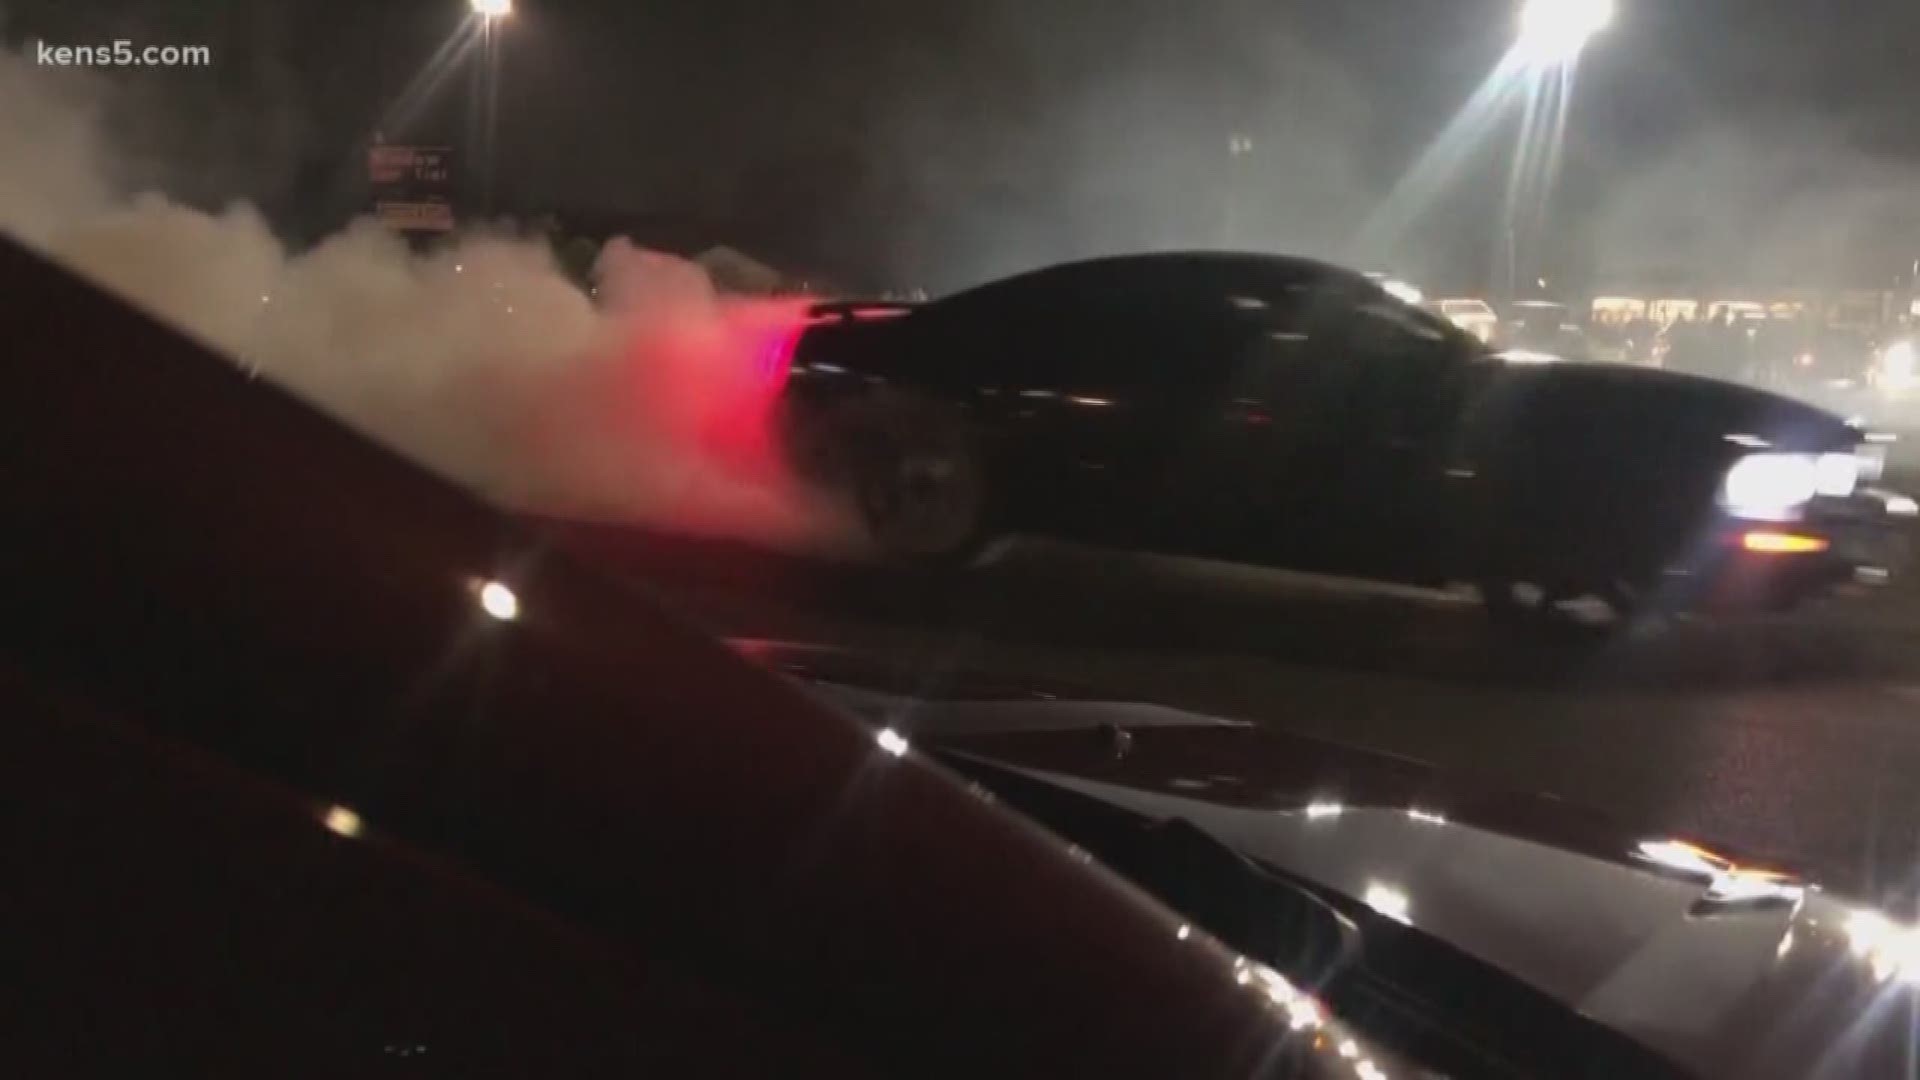 South Side Community Working With Police To Push Out Illegal Street Racing